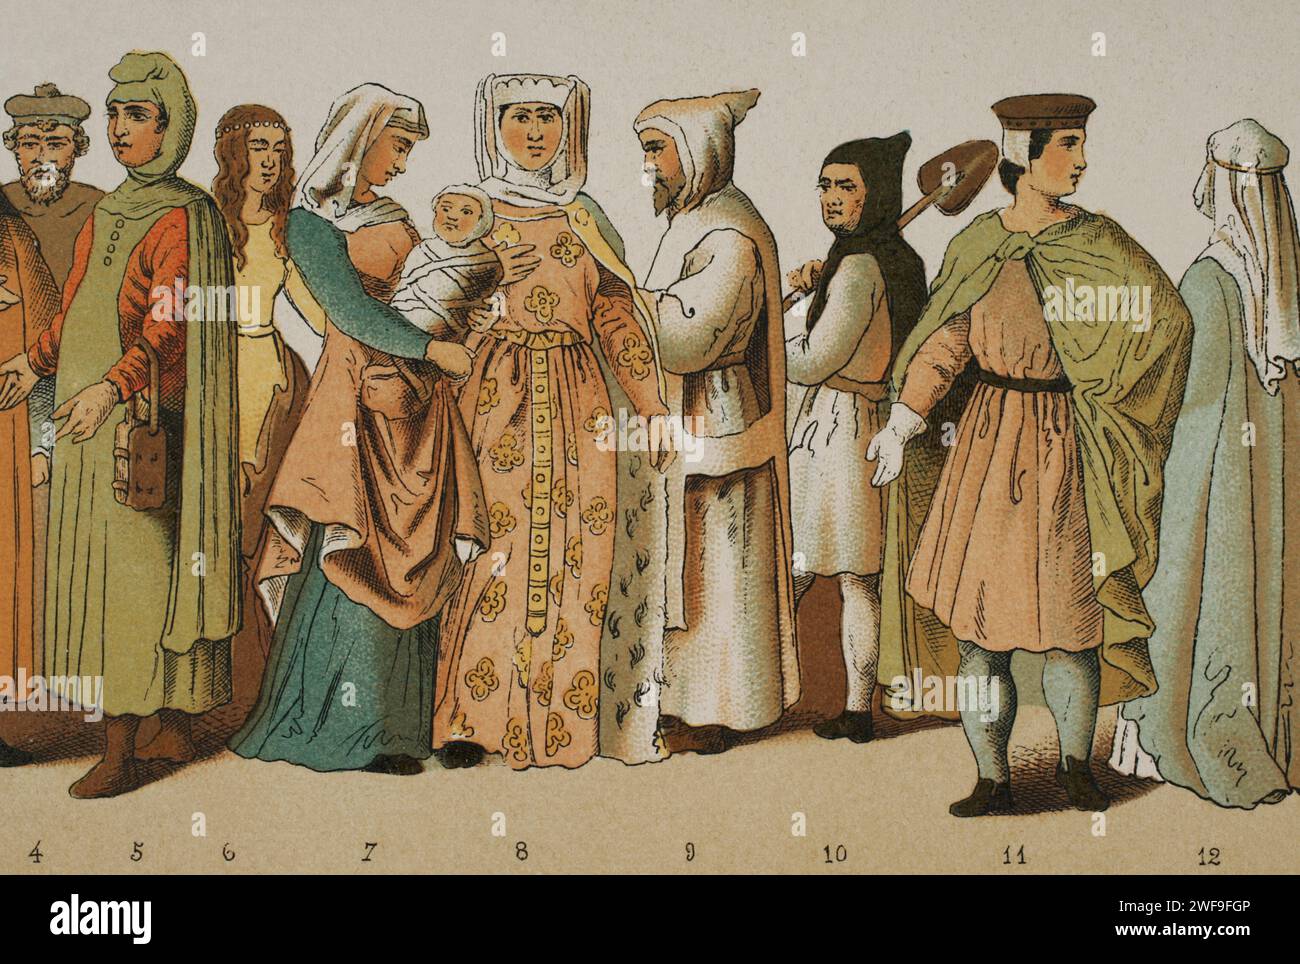 History of France. 1200. From left to right, 4-5-6-7: ordinary people dresses, 8: princess, 9: Carthusian, 10: Trappist friar, 11: nobleman, 12: noblewoman. Chromolithography. Detail. 'Historia Universal', by César Cantú. Volume VI, 1885. Stock Photo